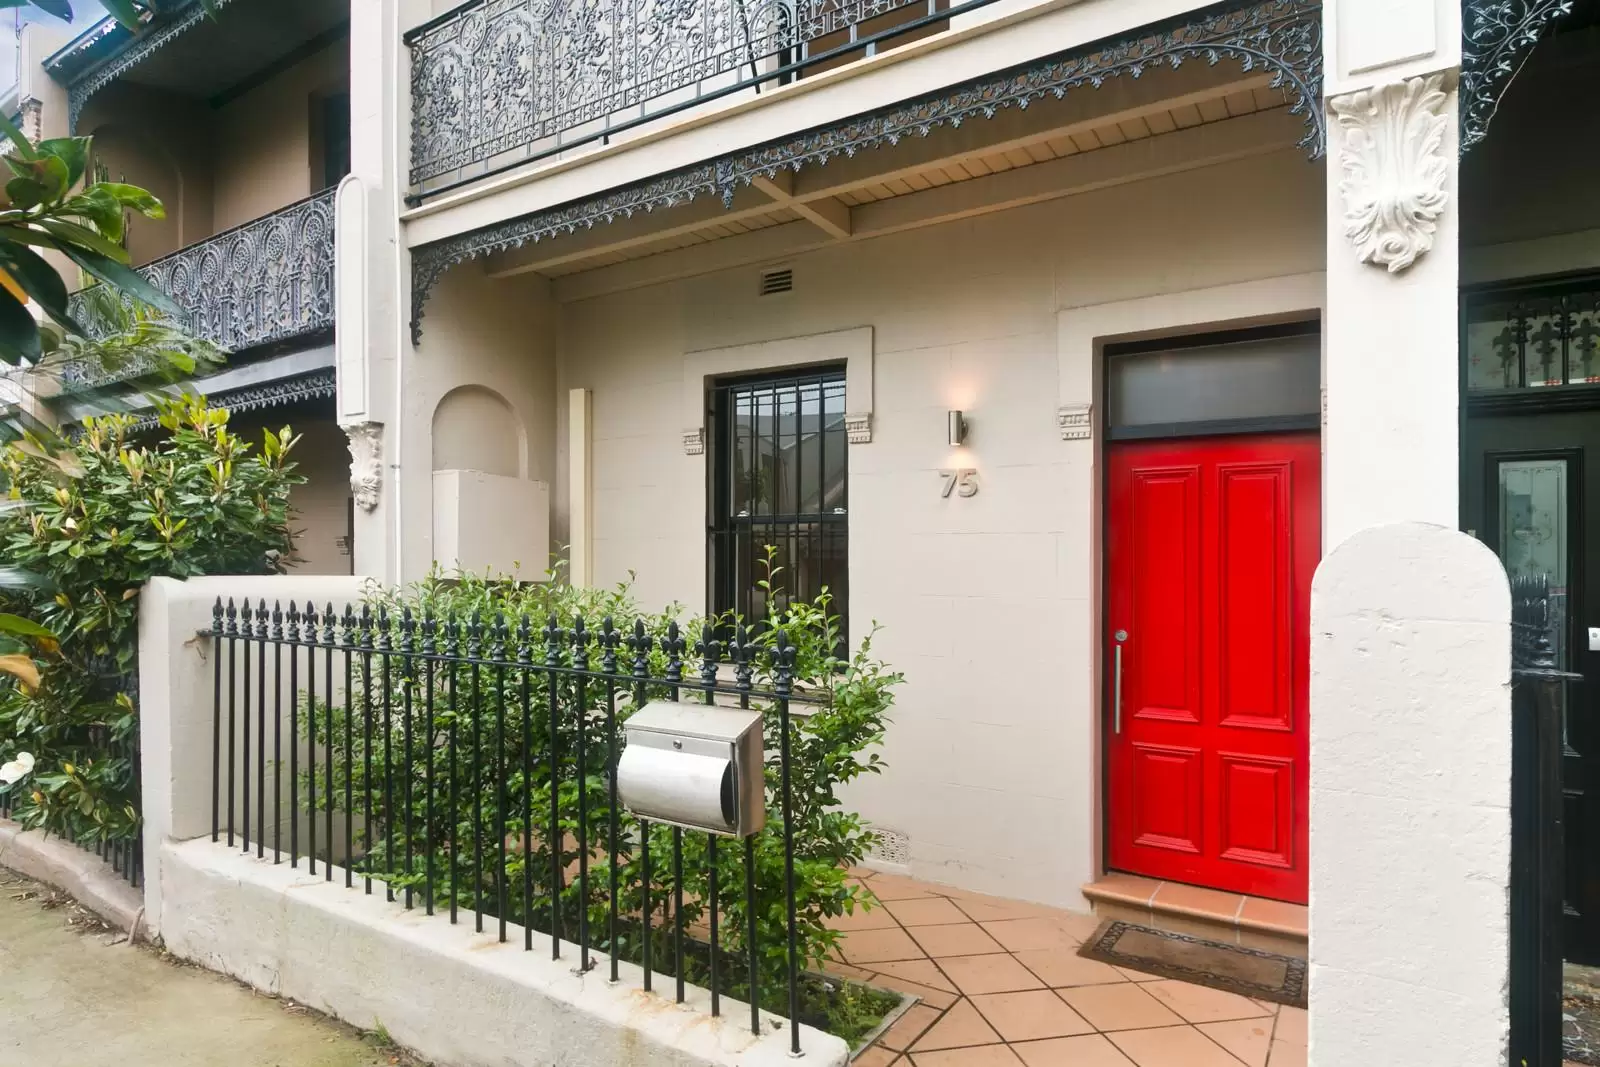 Photo #7: 75 Mill Hill Road, Bondi Junction - Sold by Sydney Sotheby's International Realty